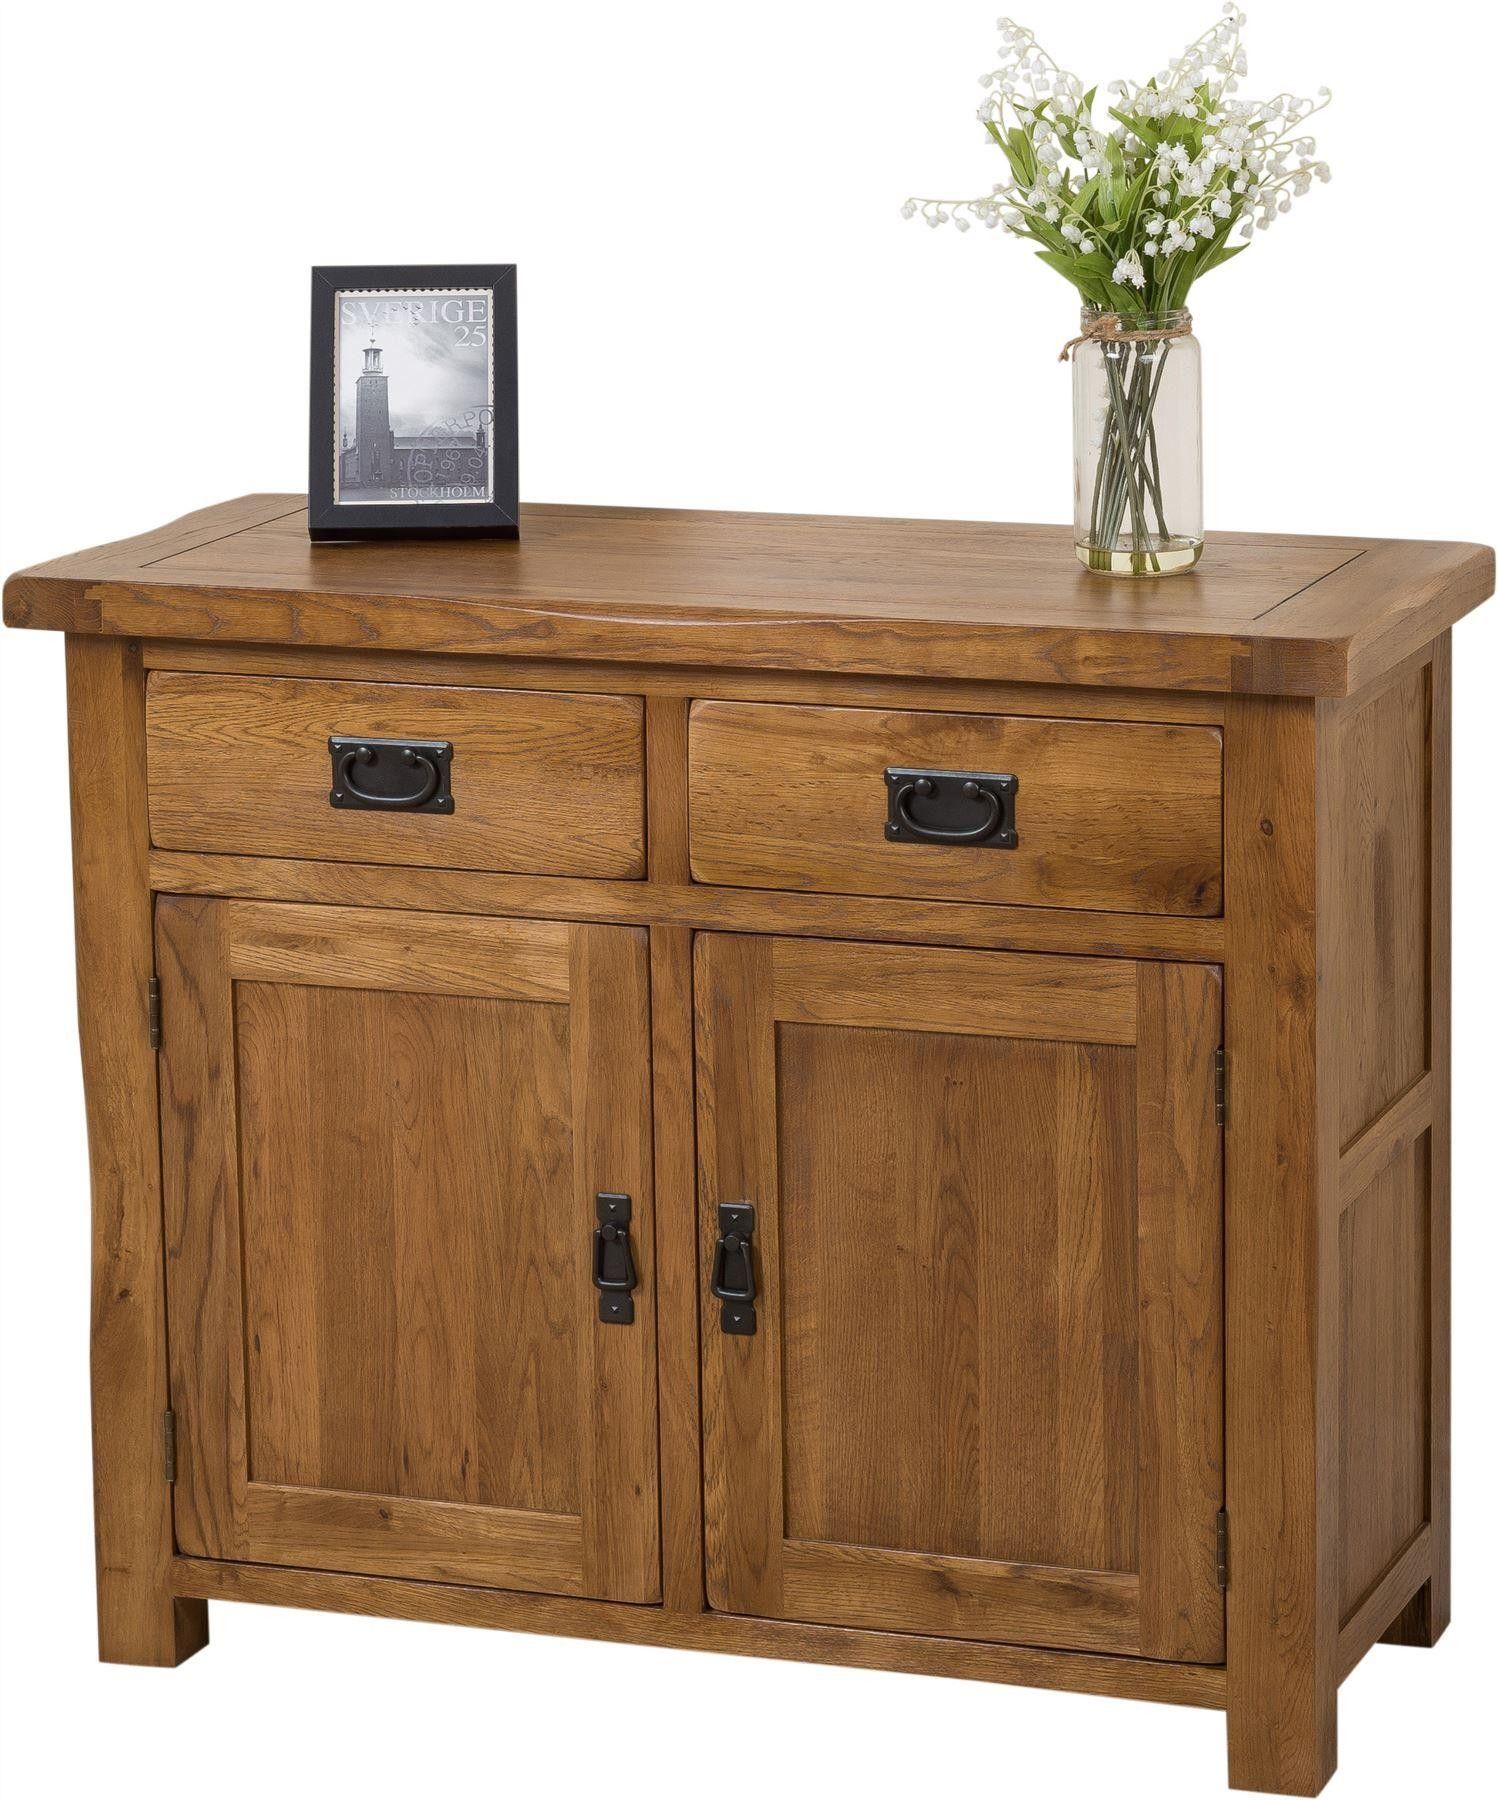 Cotswold Rustic Small Oak Sideboard | Modern Furniture Direct Throughout Rustic Oak Sideboards (View 6 of 15)